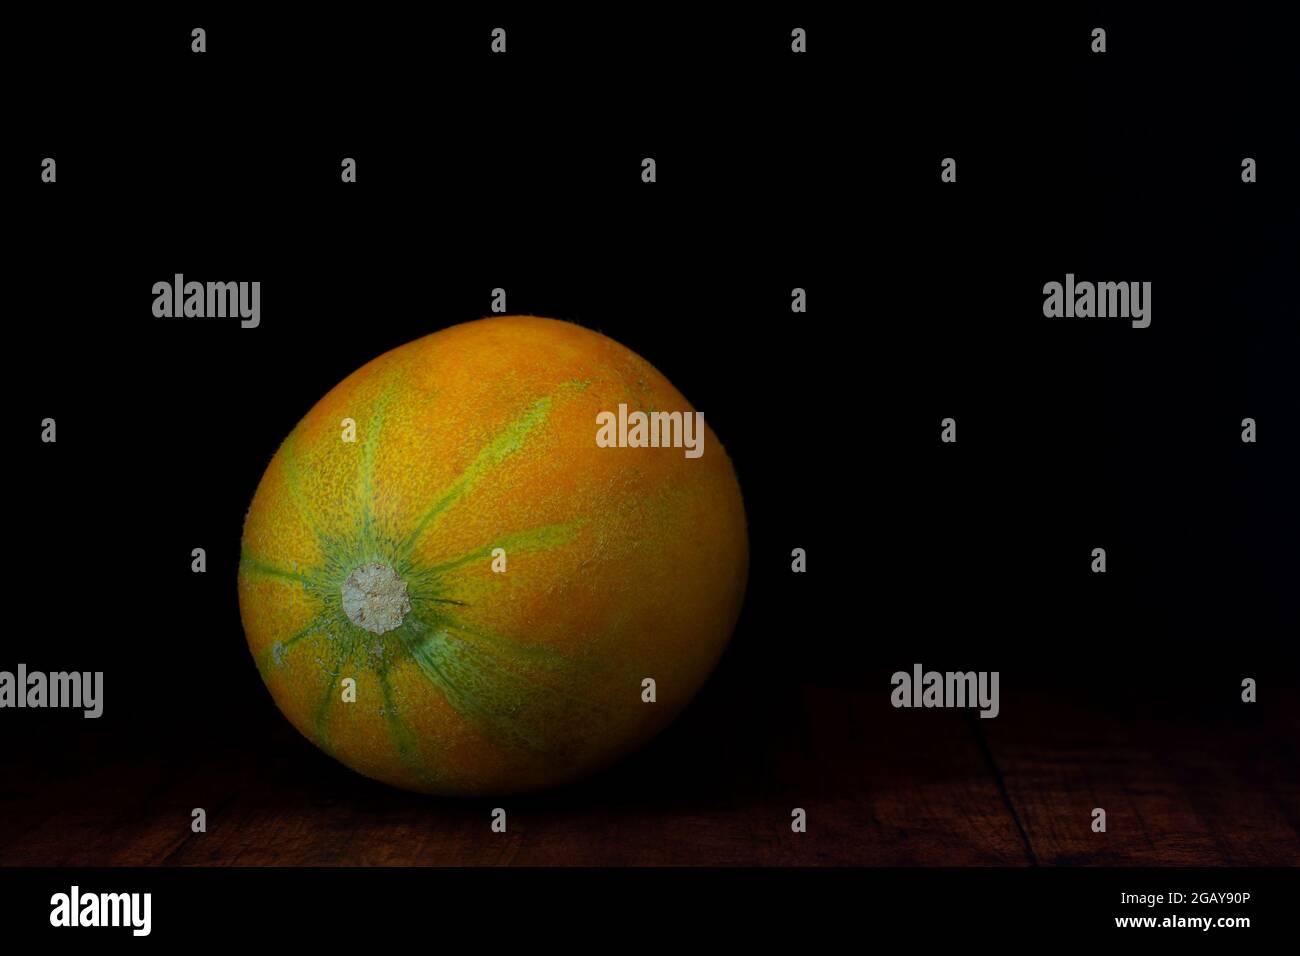 Muskmelon (Israel cantaloupe or Ha Ogen variety) is lying on a rustic weathered wood planks background. Stock Photo